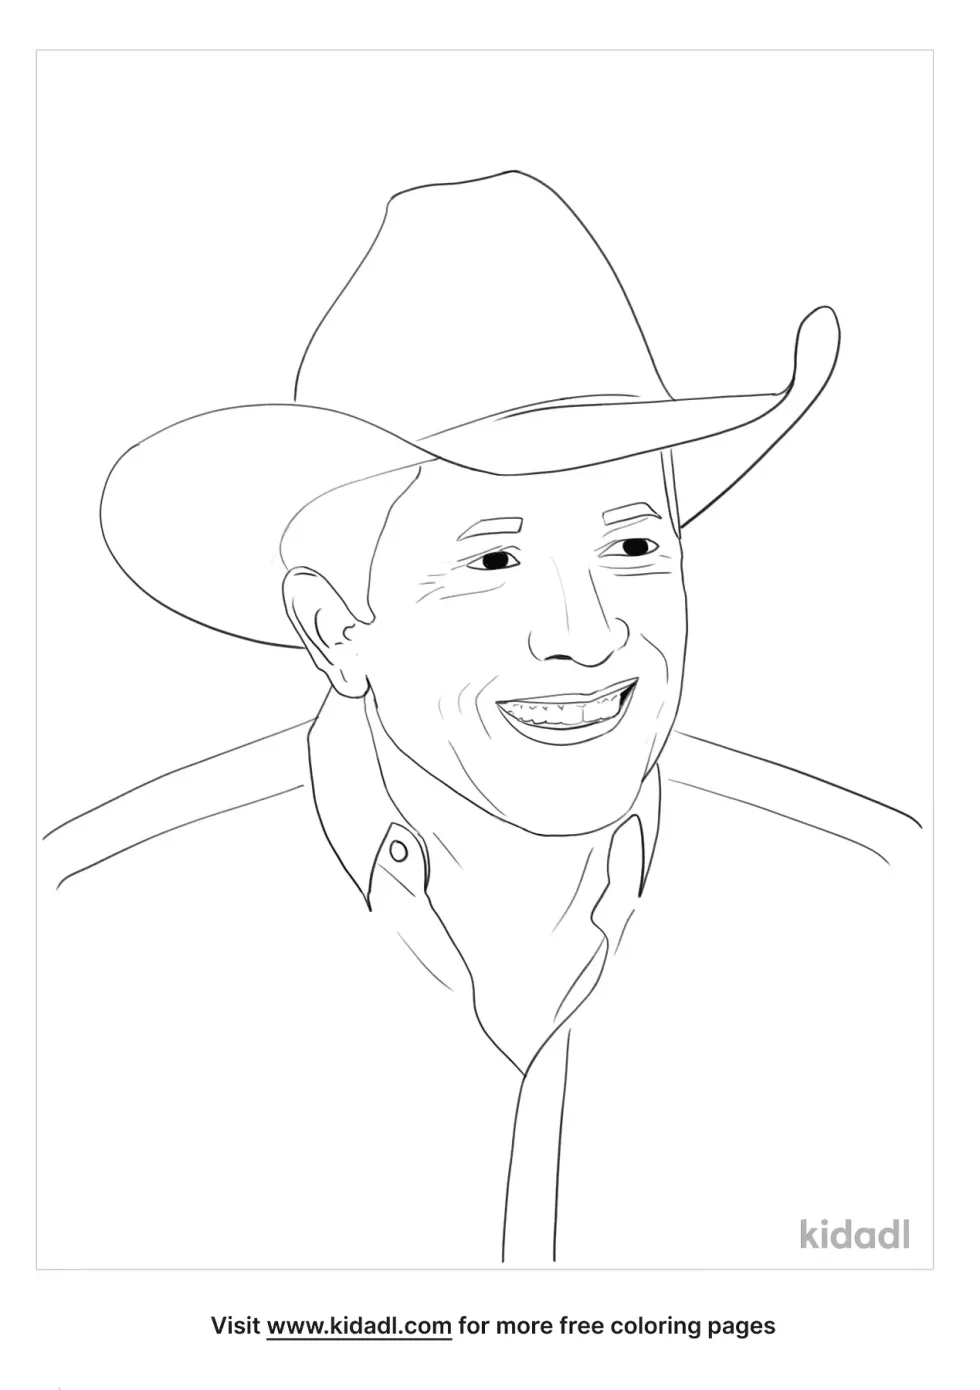 George Strait Coloring Page